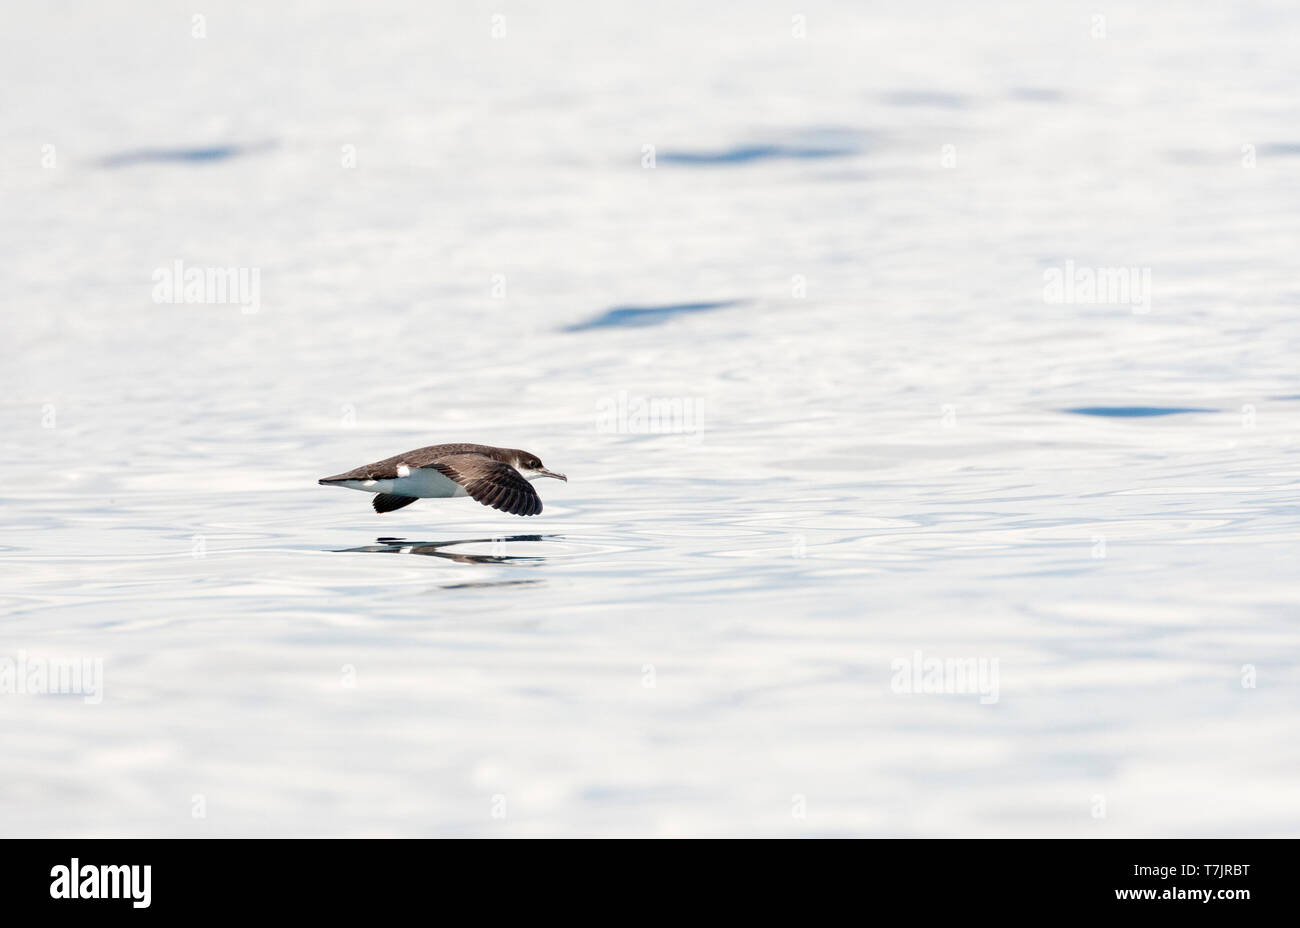 Manx Shearwater (Puffinus puffinus) in fligh, glidiing low of the surface of the Atlantic ocean off Cornwall in England during late summer. Stock Photo